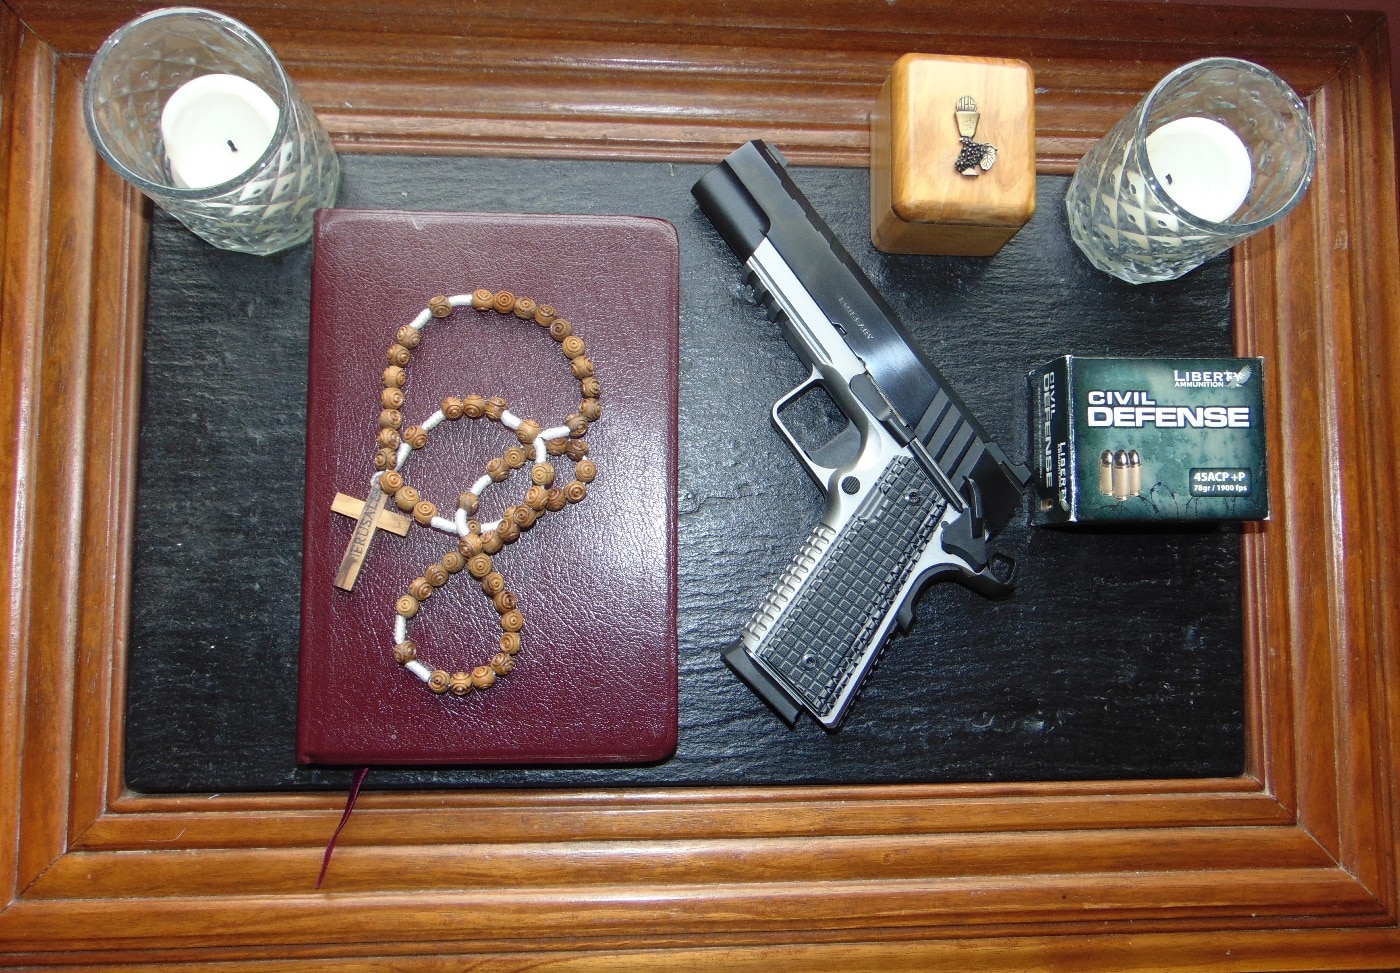 In this photo made by the author, we see his Springfield Armory Emissary 1911 .45 ACP pistol with a rosary and other items he carries when going to church.